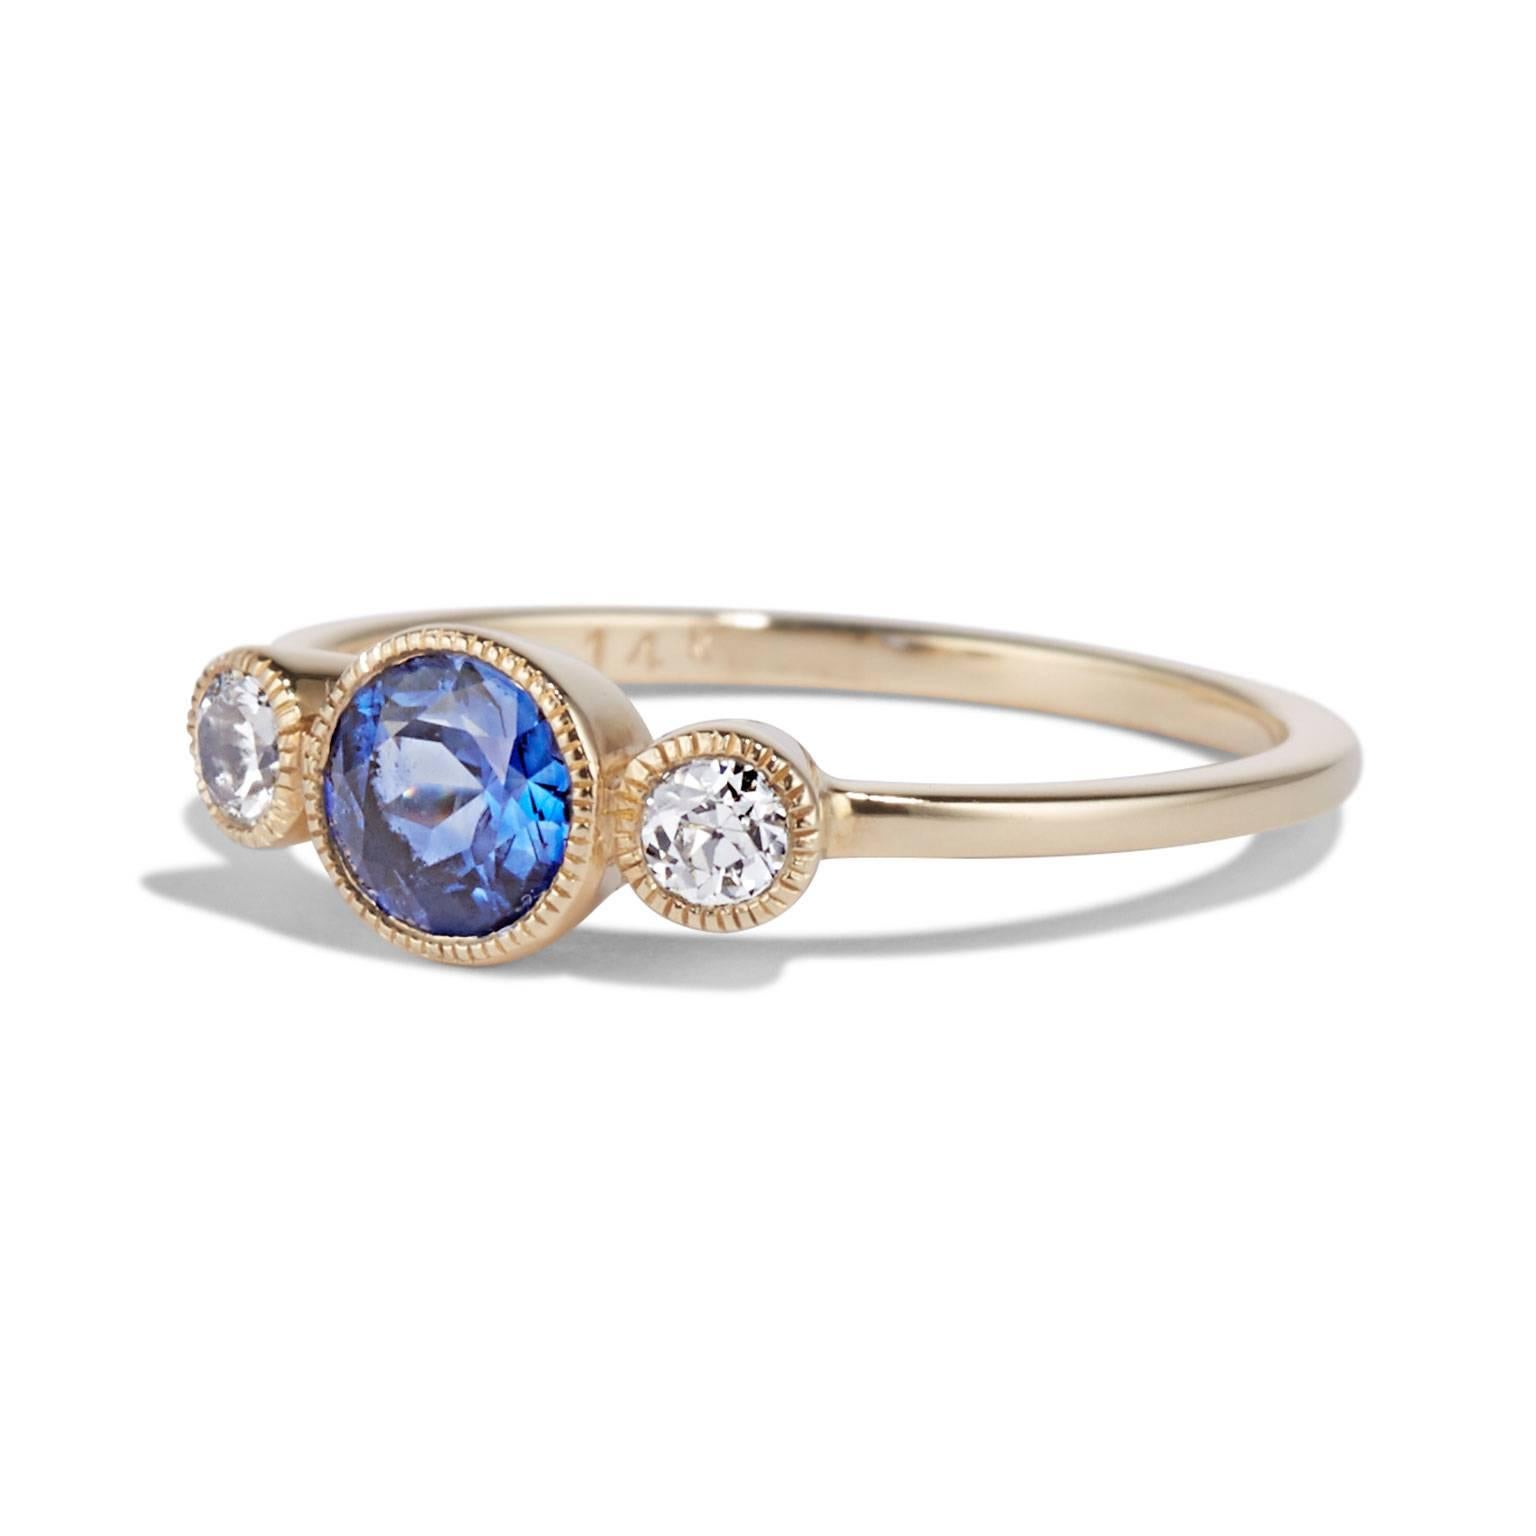 The juxtaposition of a luminous 0.73-carat sapphire alongside brilliant cut old mine diamonds creates a strikingly pretty style in the Sapphire Circles ring from Cushla Whiting's Petite Colours range.

The SAPPHIRE CIRCLE ring is made in 14 carat